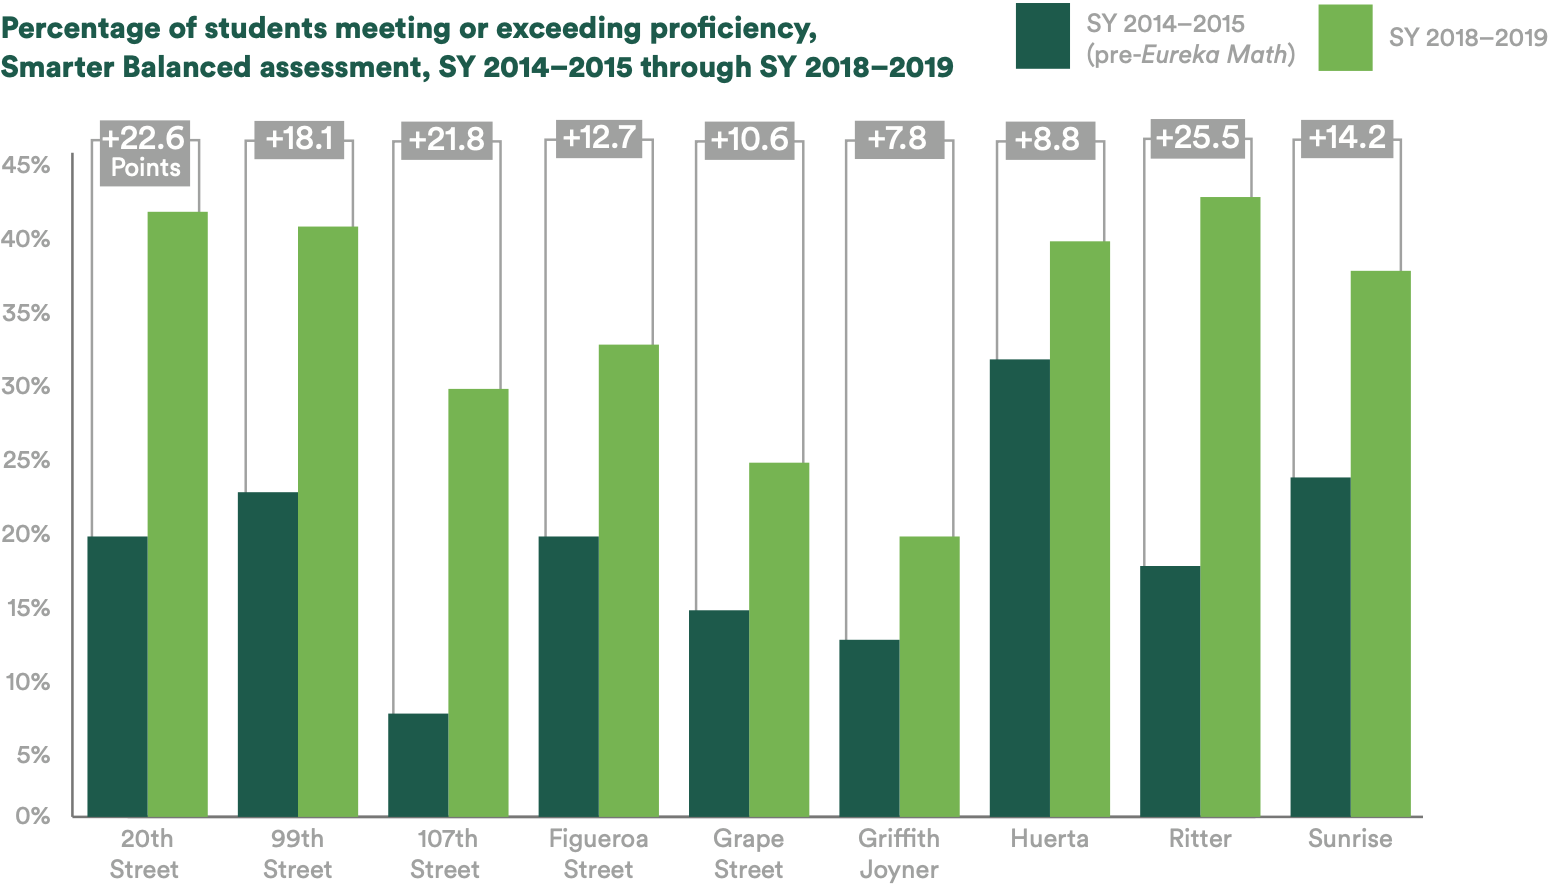 A bar chart of the percentage of students meeting or exceeding proficient on the Smarter Balanced state math assessment from SY2014–2015 (pre-Eureka Math implementation) through SY2018–2019. The bar charts show an increase in the percenrage of students meeting or exceeding proficiency across elementary grades 3–5 in 9 schools. 